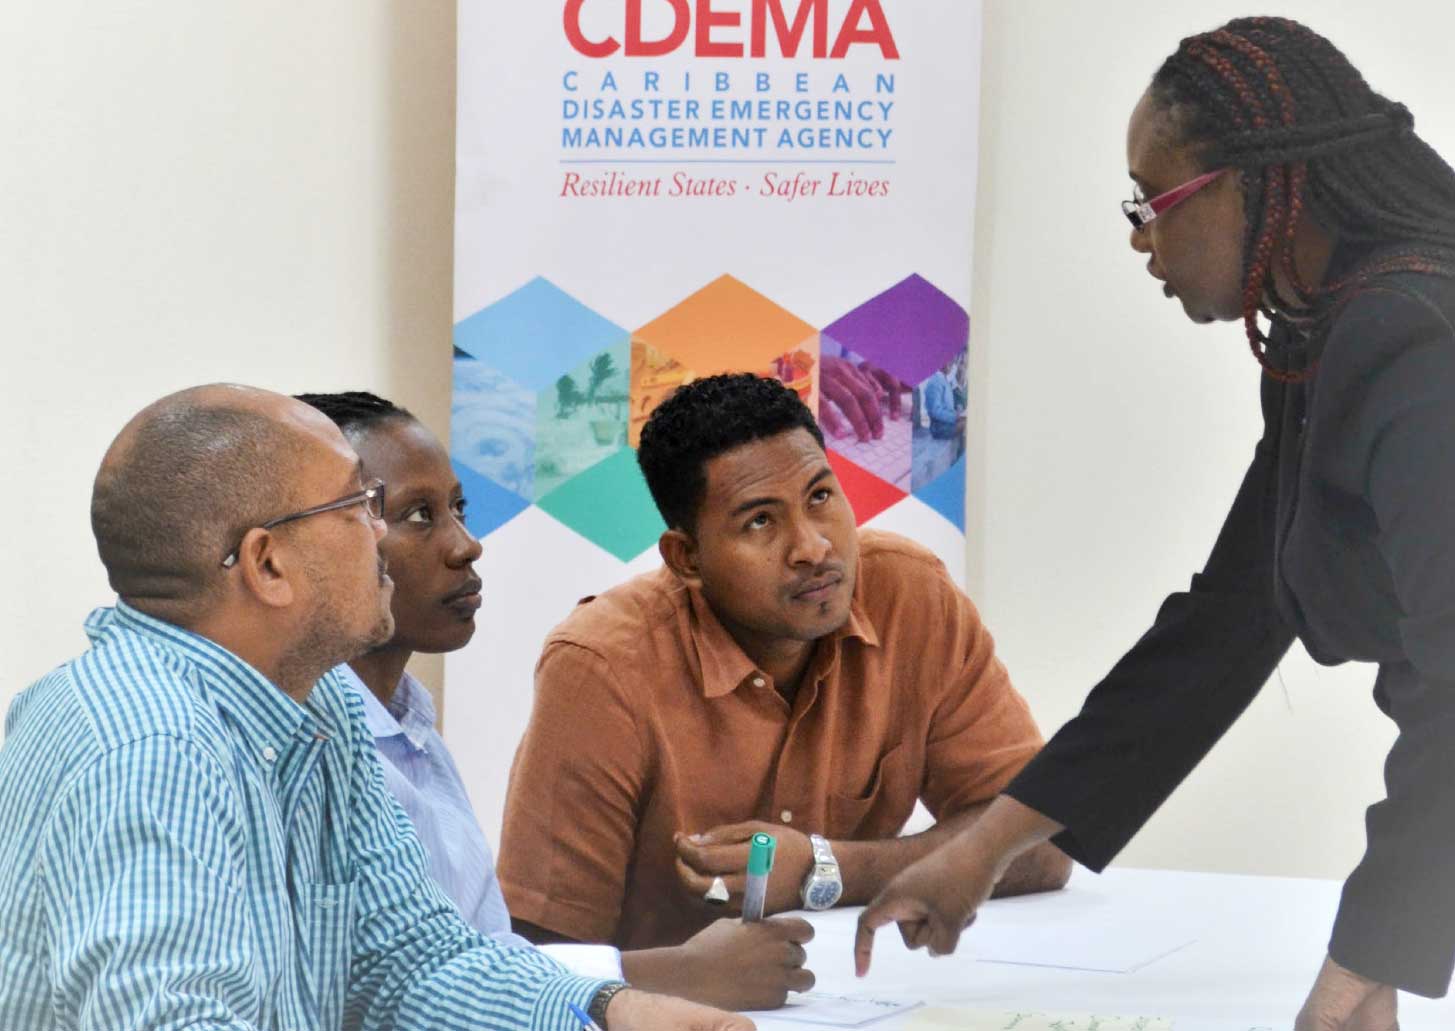 Image: Members of the ODM Dominica Staff during an orientation session at the CDEMA Coordinating Unit. L-R: Fitzroy Pascal, National Disaster Coordinator (Ag.), Karen ReviereCuffy, Programme Officer and Donalson Frederick, Programme Officer with Andria Grosvenor, Planning and Business Development Manager, CDEMA.